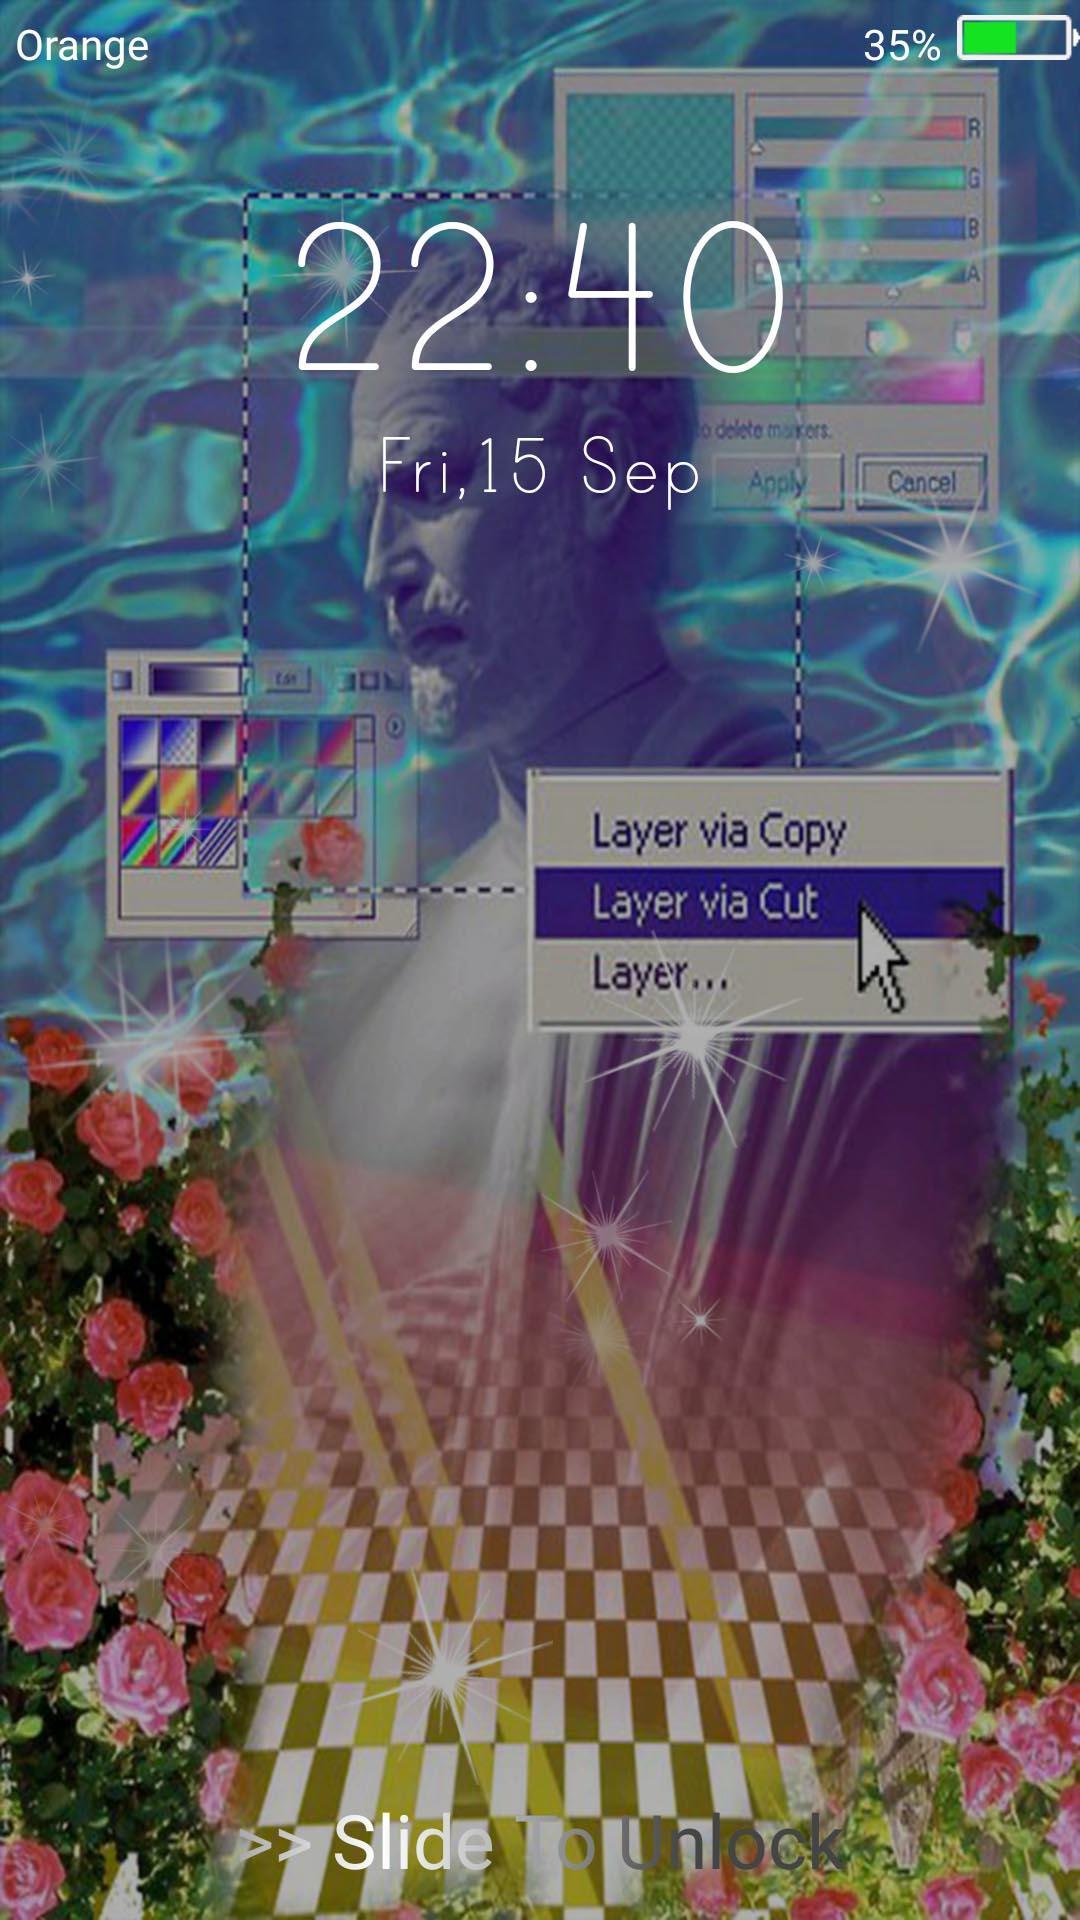 Vaporwave Live Wallpapers Lock Screen For Android Apk Download